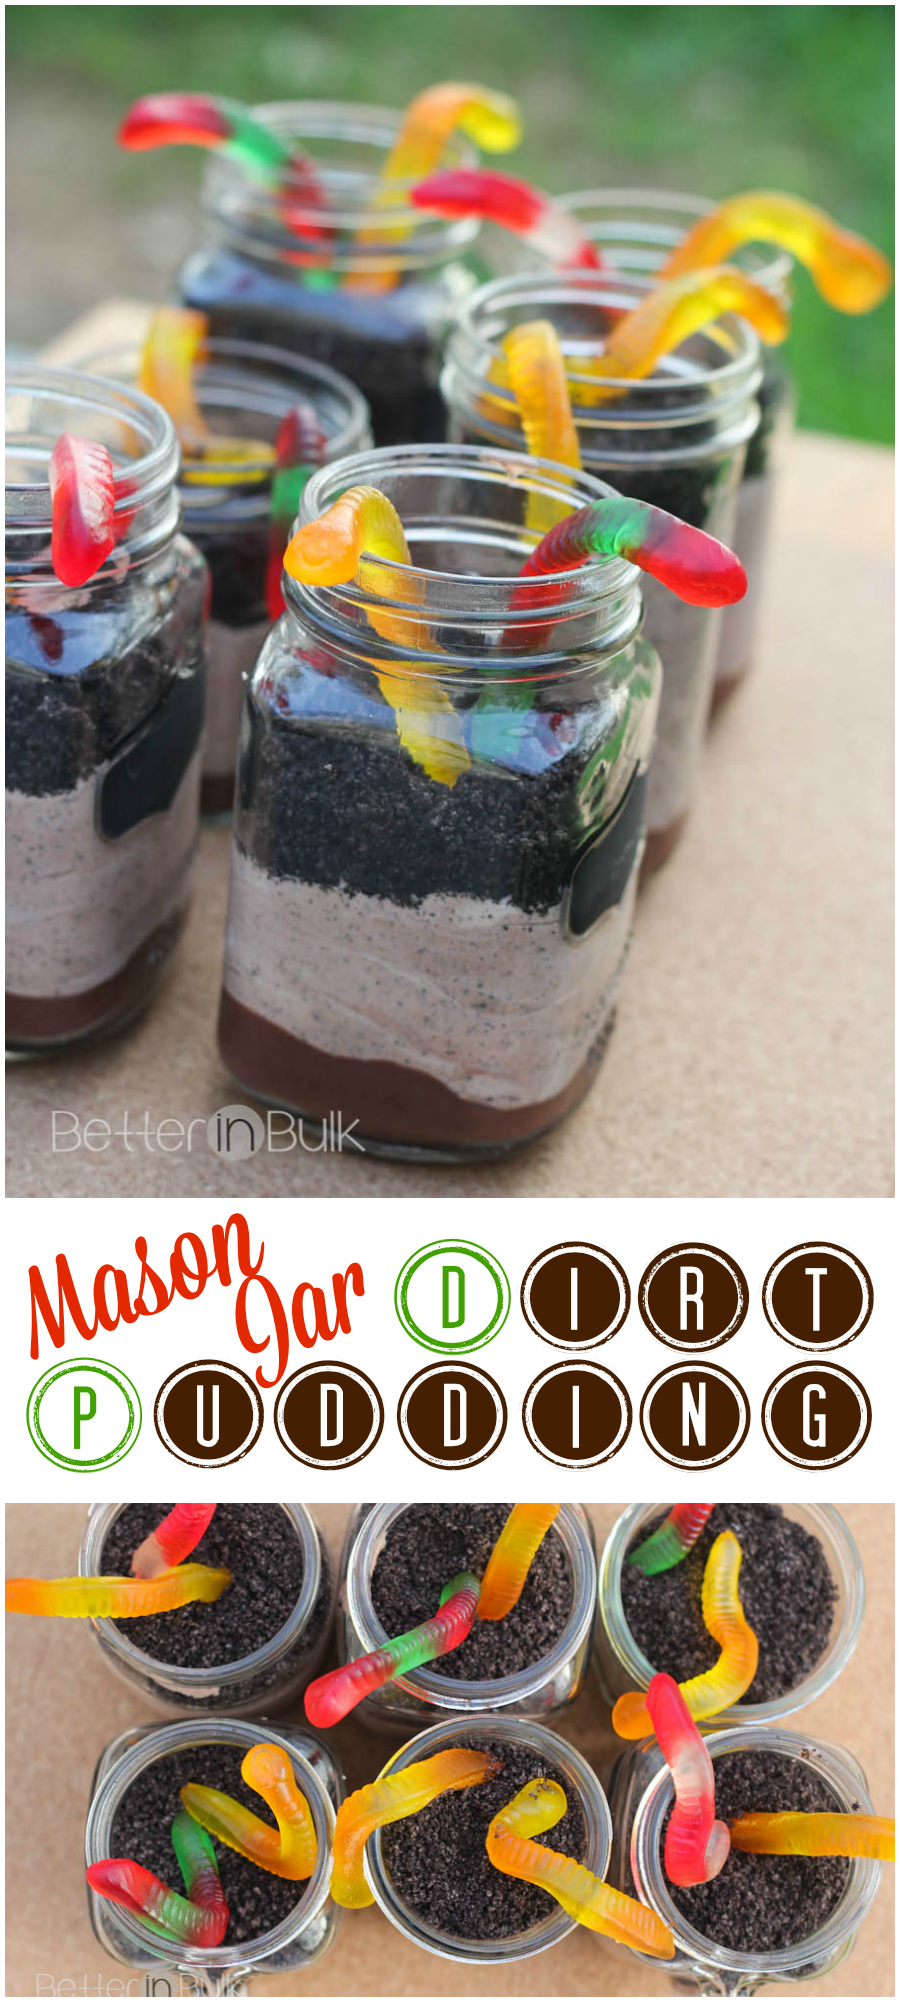 Mason Jar Dirt Pudding with Oreo "Dirt" and Gummy Worms